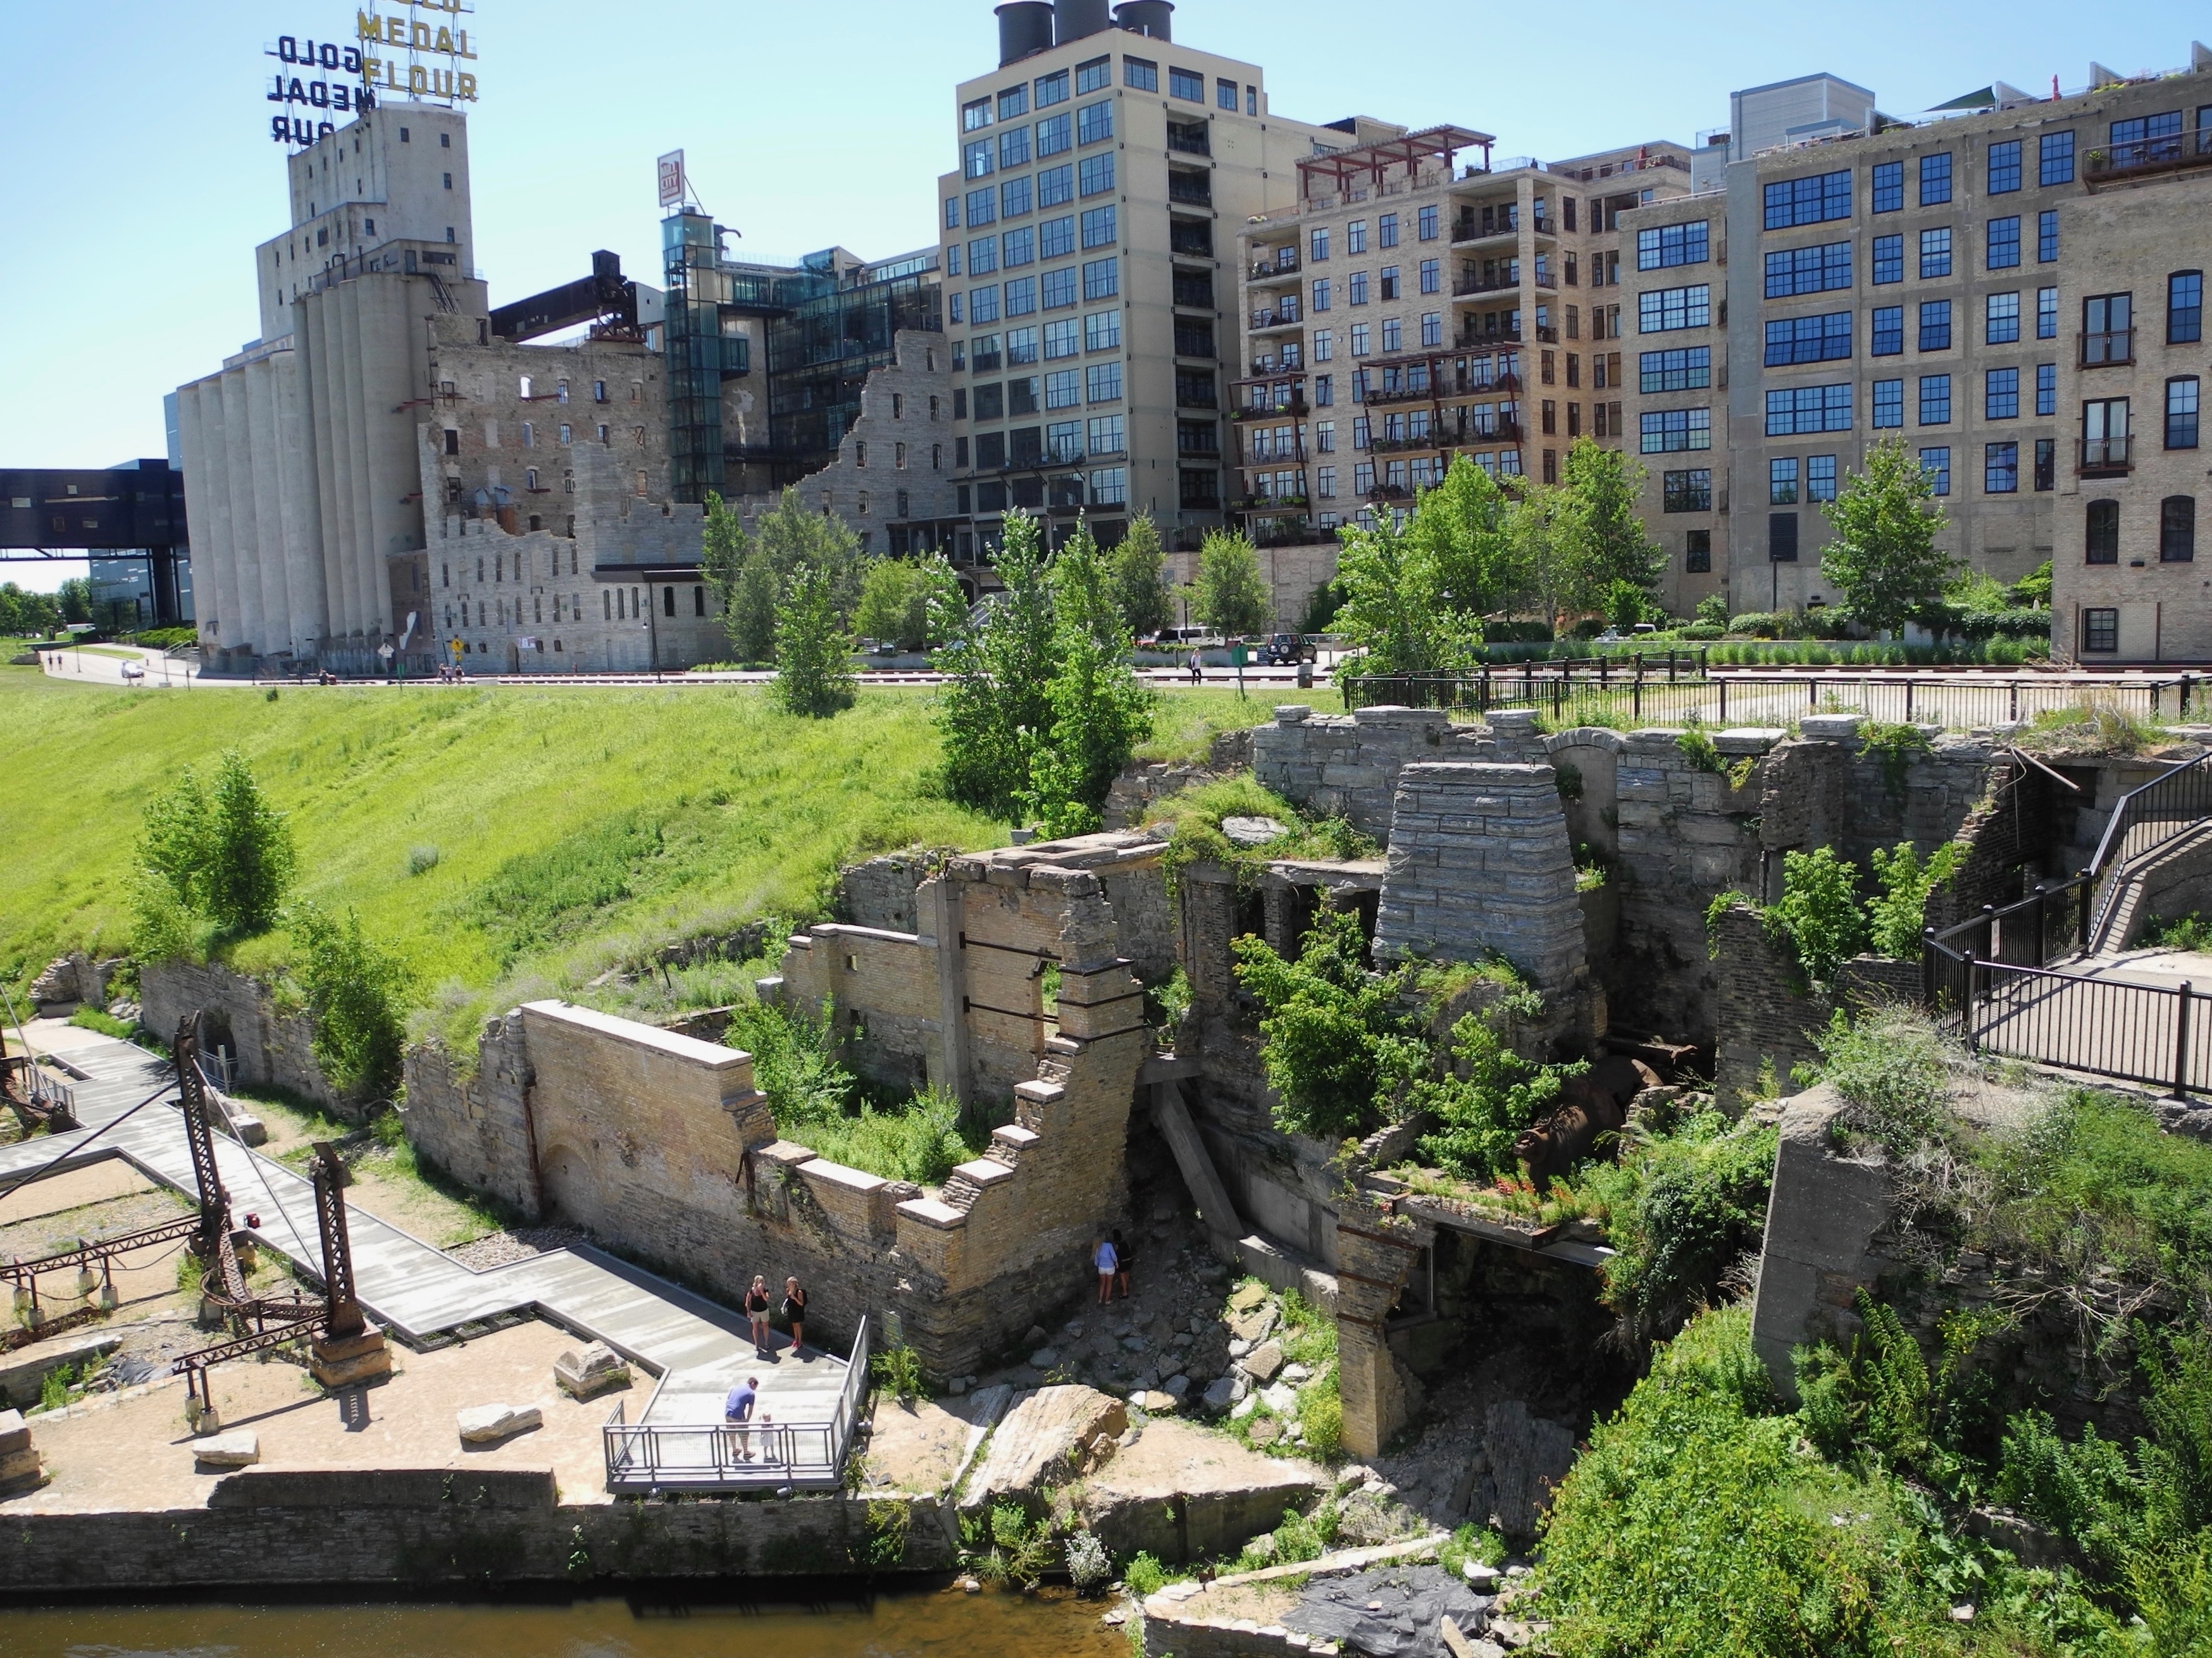 Mill Ruins Park is a park in downtown Minneapolis, Minnesota, United States, standing on the west side of Saint Anthony Falls on the Mississippi River. The park interprets the history of flour milling in Minneapolis and shows the ruins of several flour mills, built between 1859 and the mid-1890s, that were abandoned.

#ruins #OnTheRoad